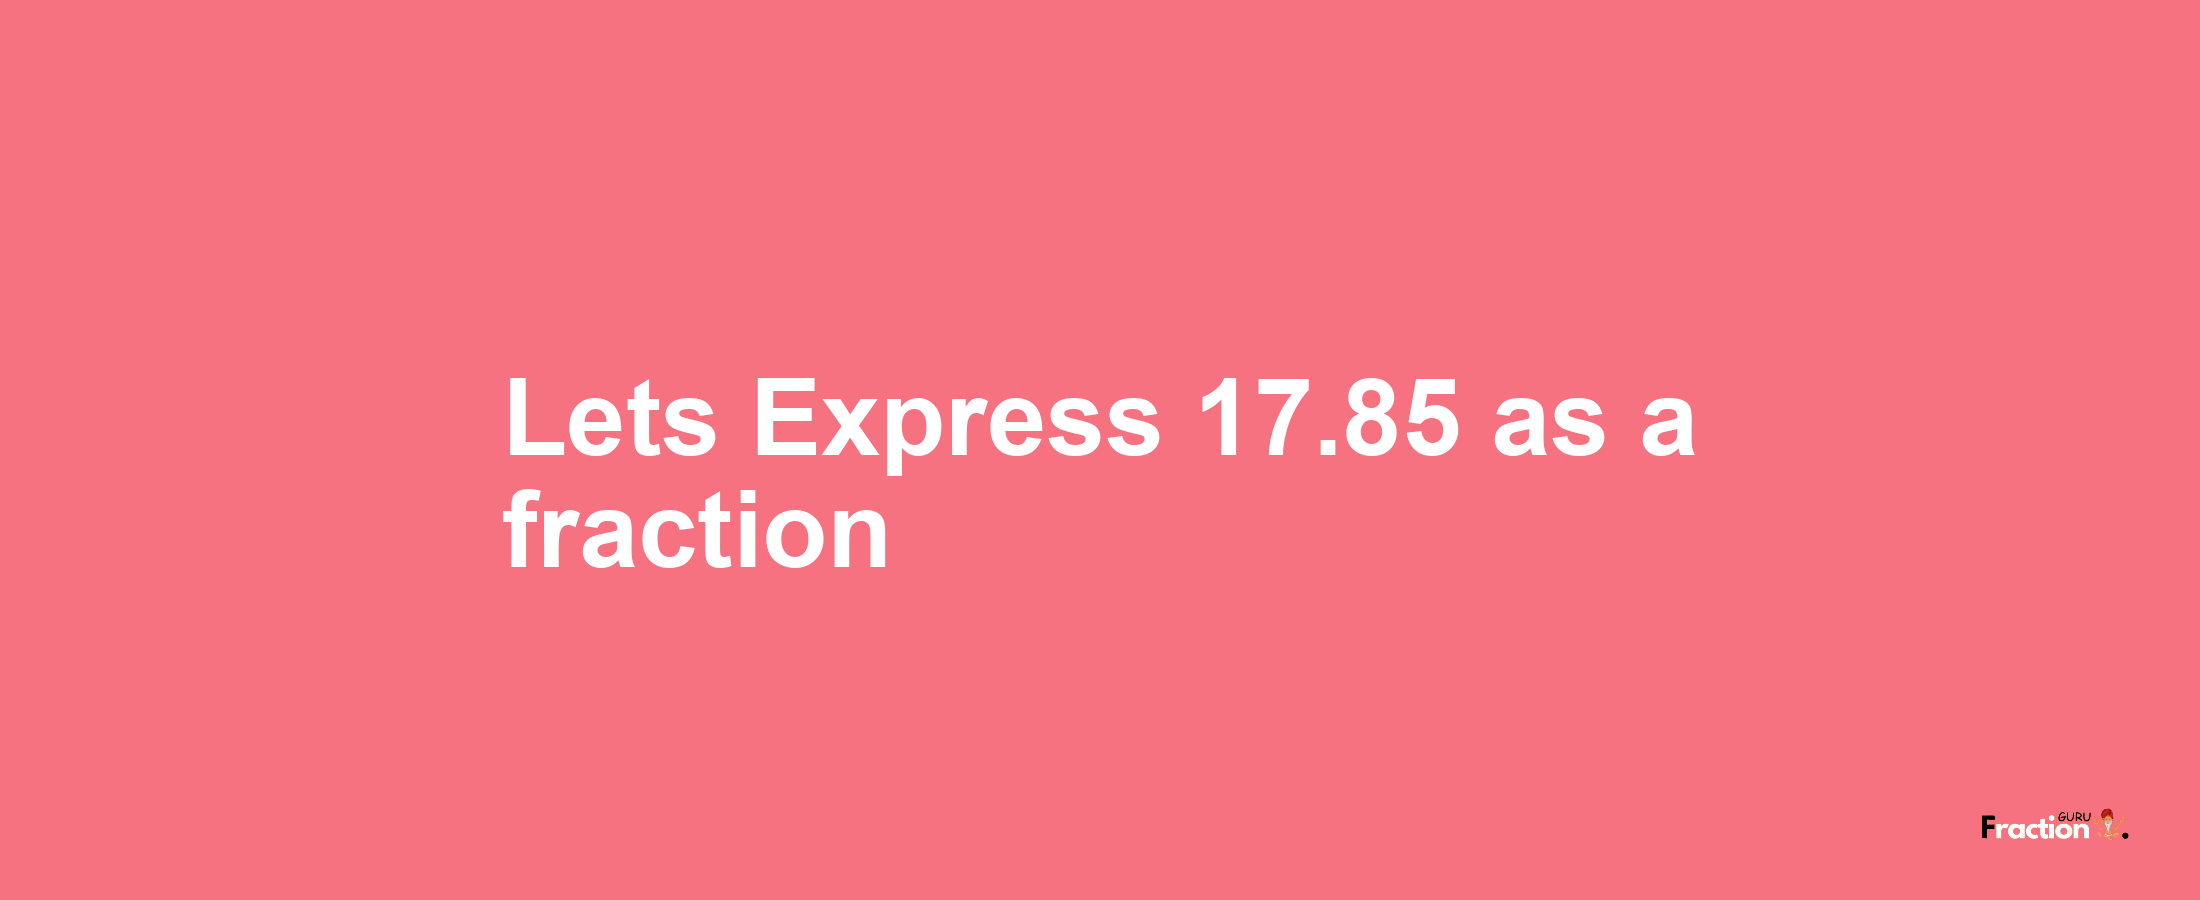 Lets Express 17.85 as afraction